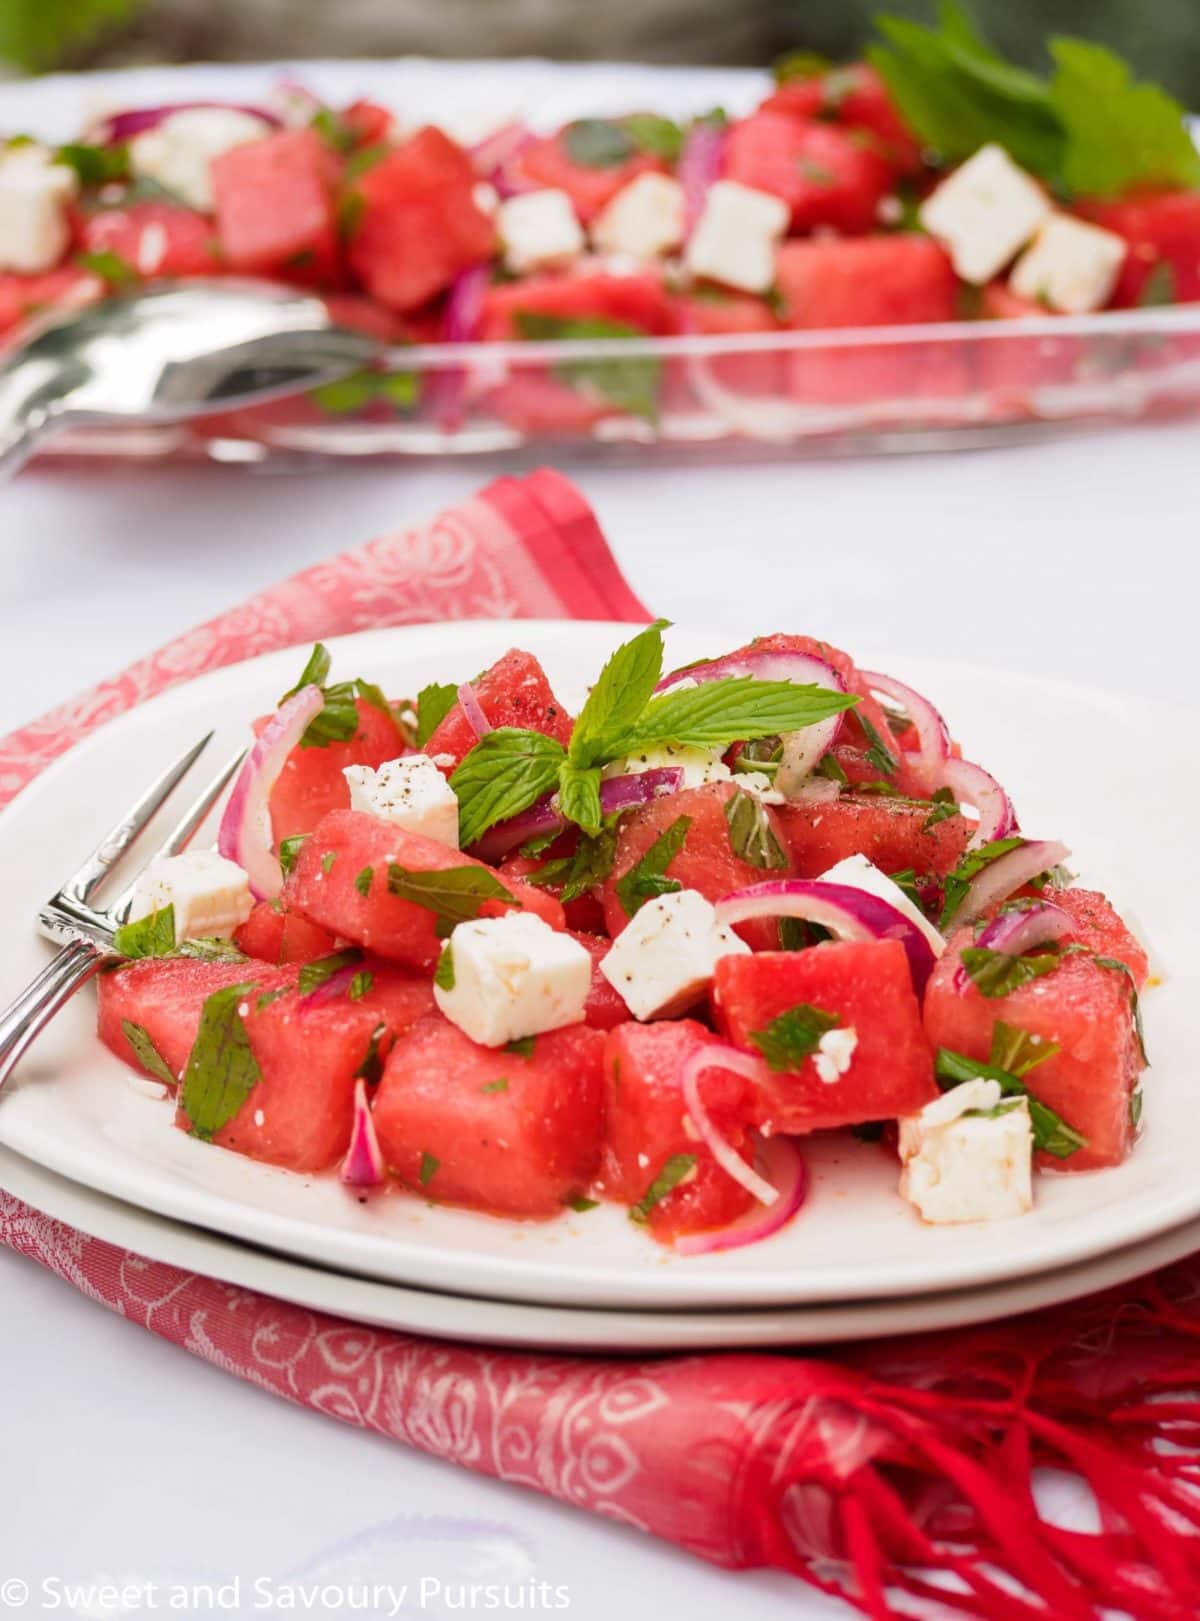 50 Summer Salads The Whole Family Will Love